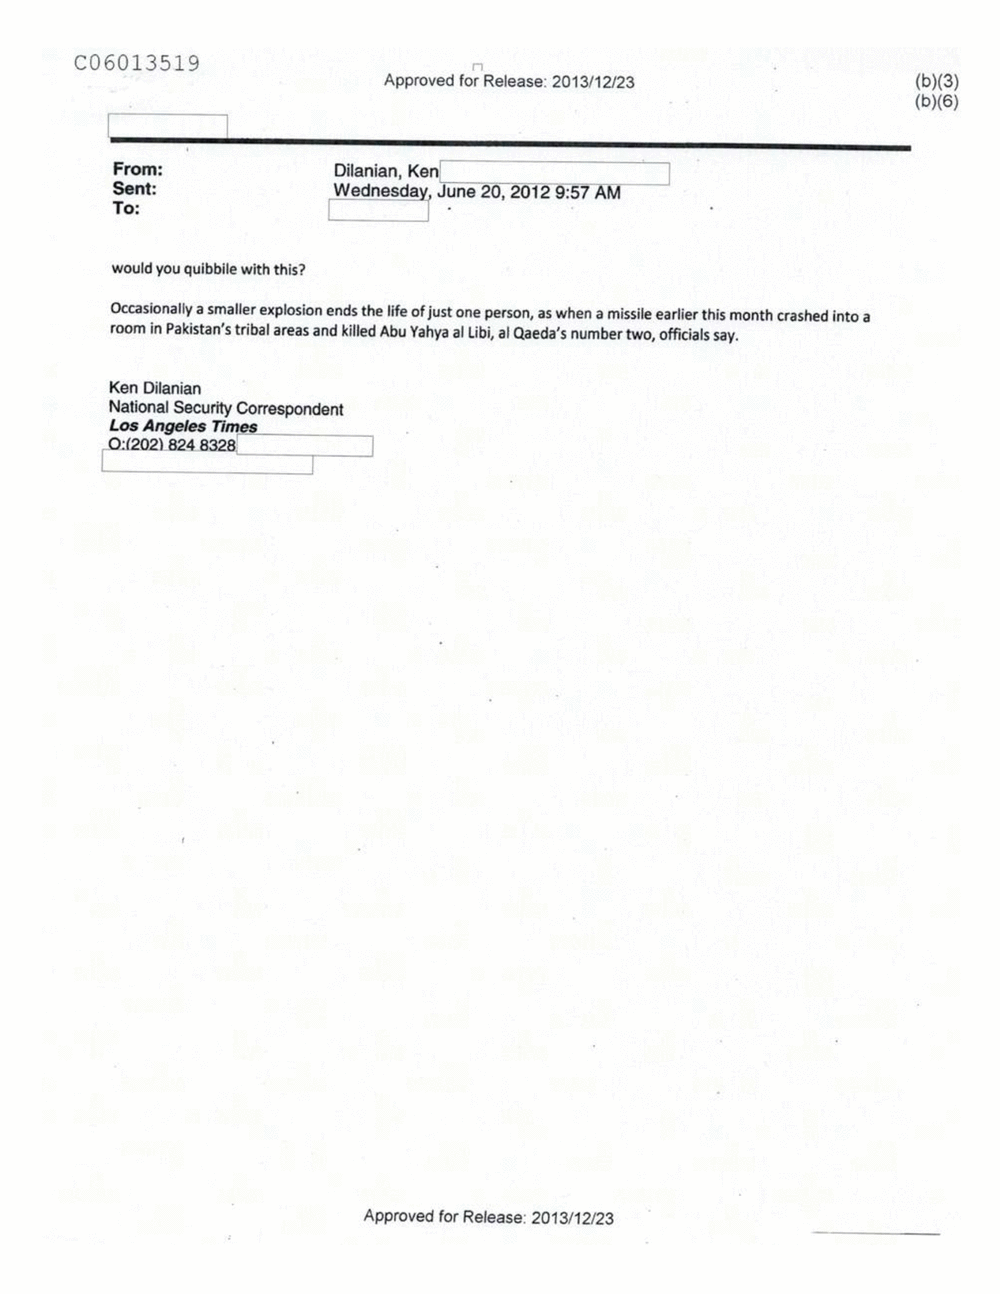 Page 357 from Email Correspondence Between Reporters and CIA Flacks